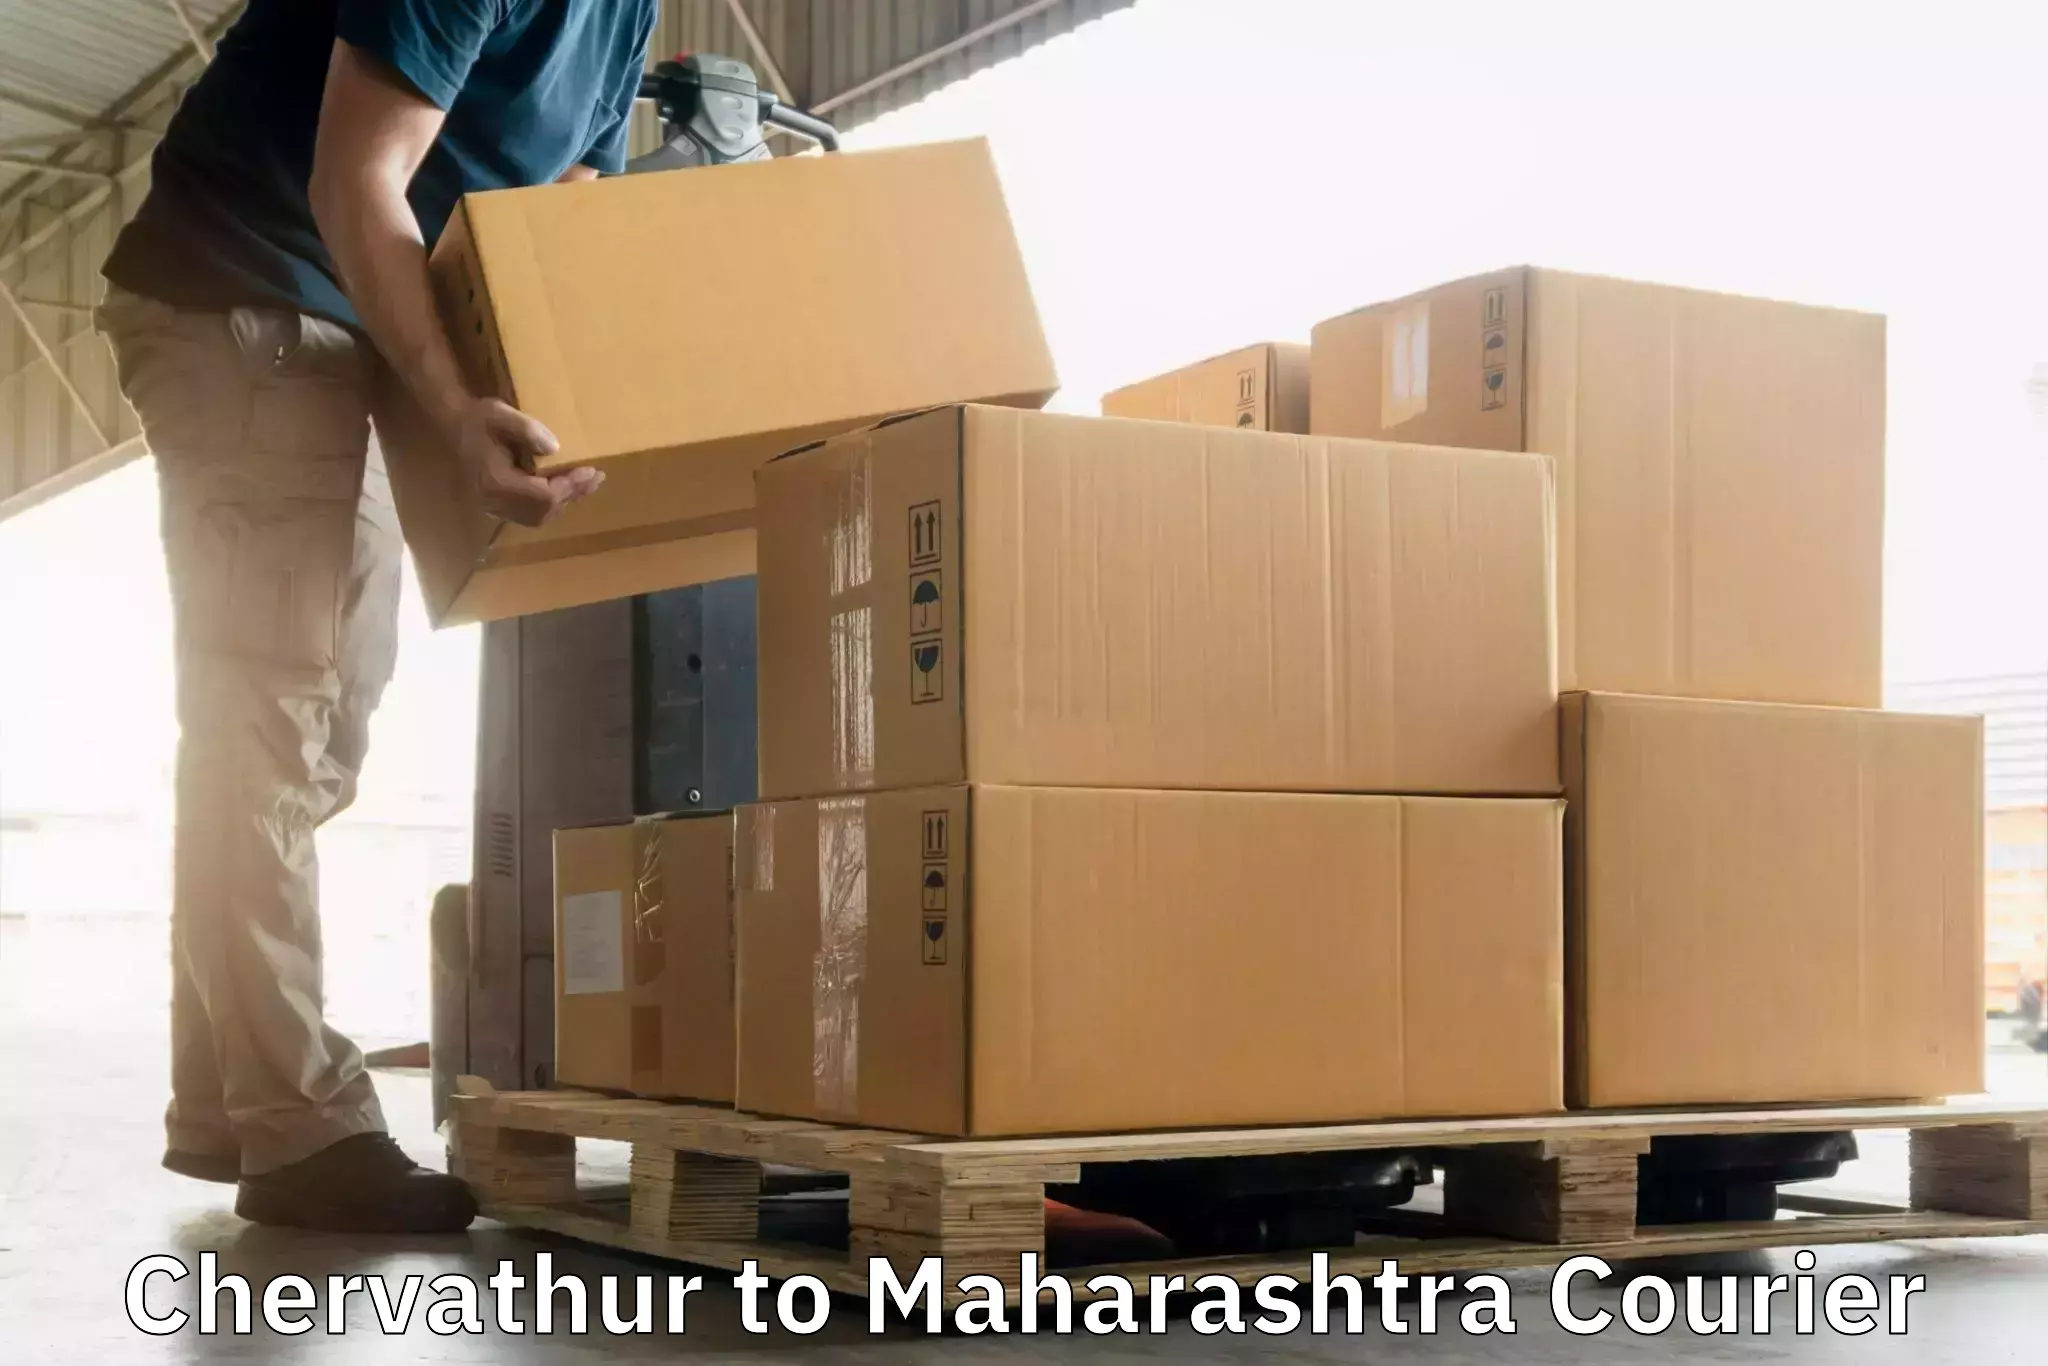 State-of-the-art courier technology Chervathur to Mumbai Port